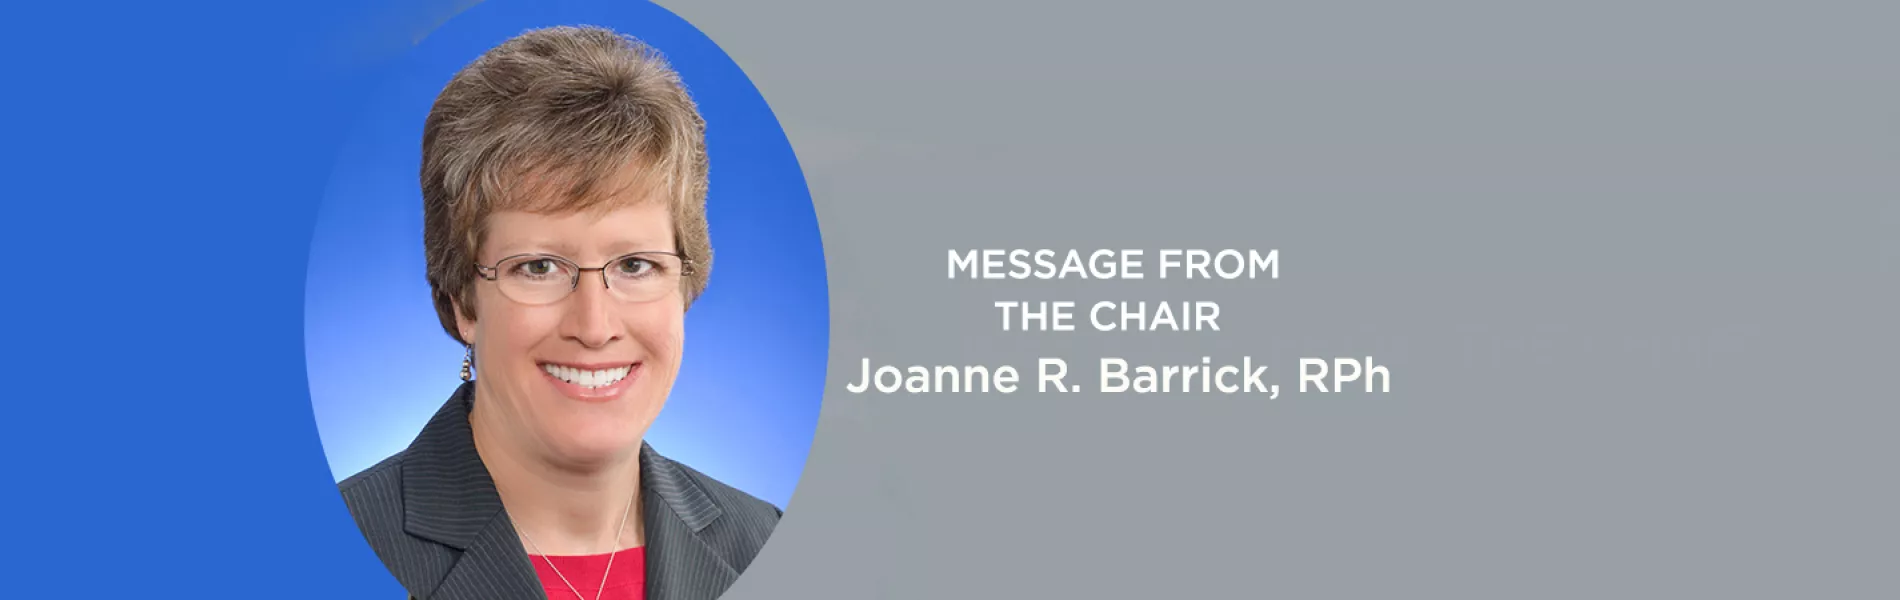 Message from the Chair Joanne R. Barrick banner